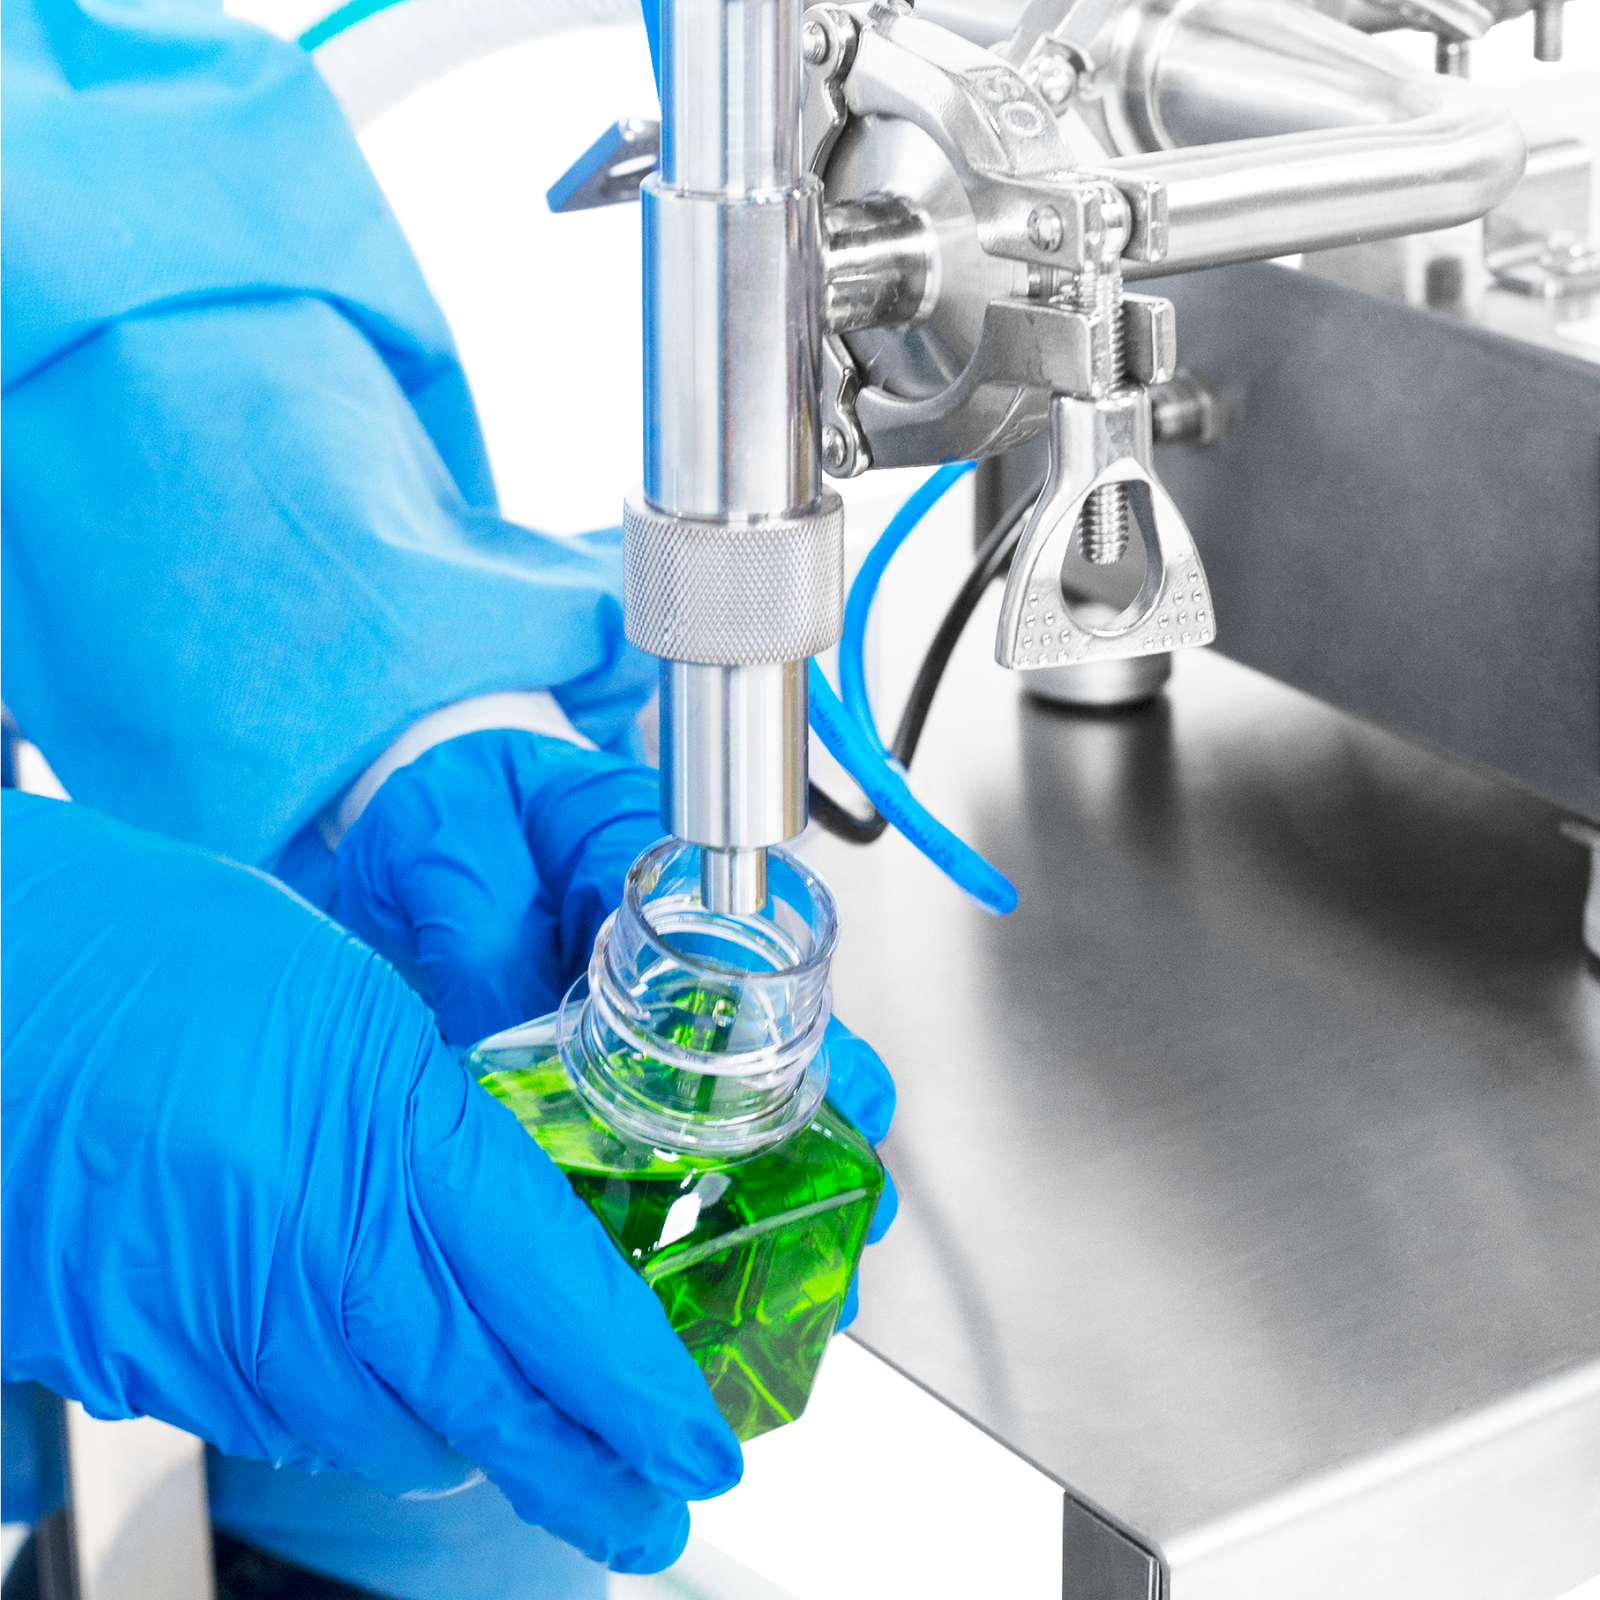 A person wearing nitrile safety gloves operating the Low Viscosity Piston Filler by JORES TECHNOLOGIES®. The worker is positioning a 100ml bottle below the tip of the non-drip nozzle to be filled with accuracy by the liquid filling machine.